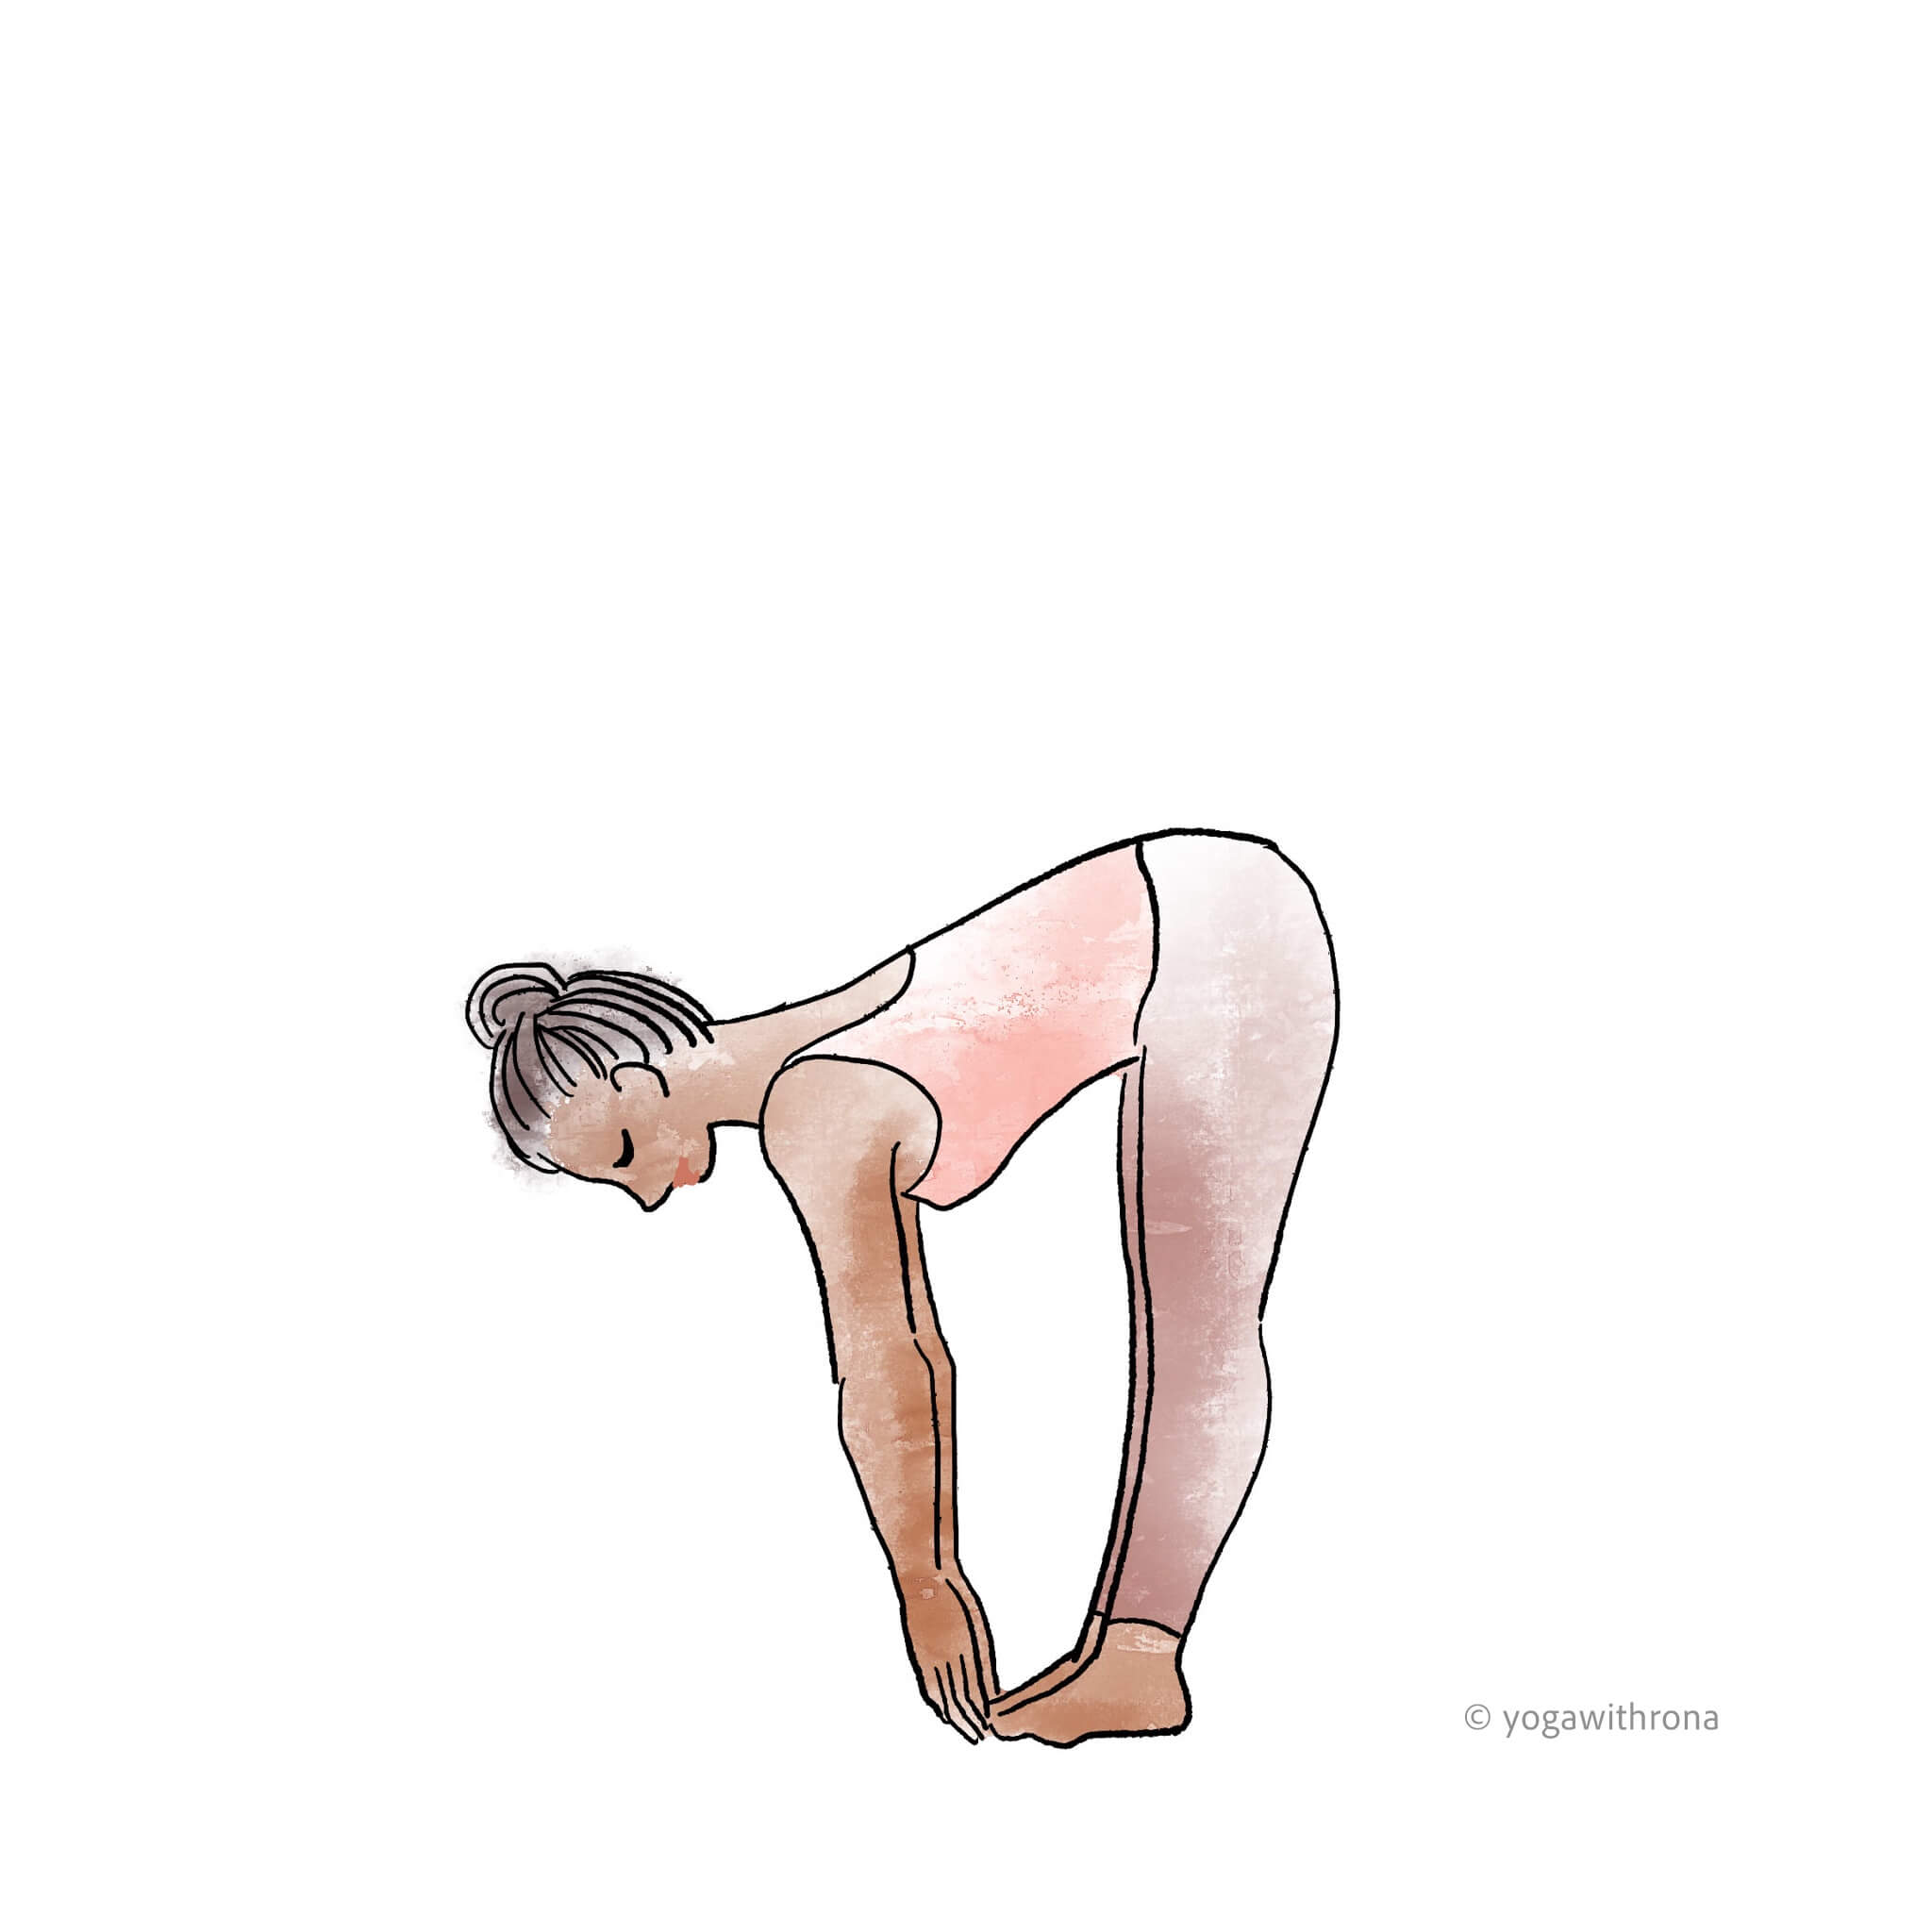 Yoga Pose of the Month: Standing Forward Fold